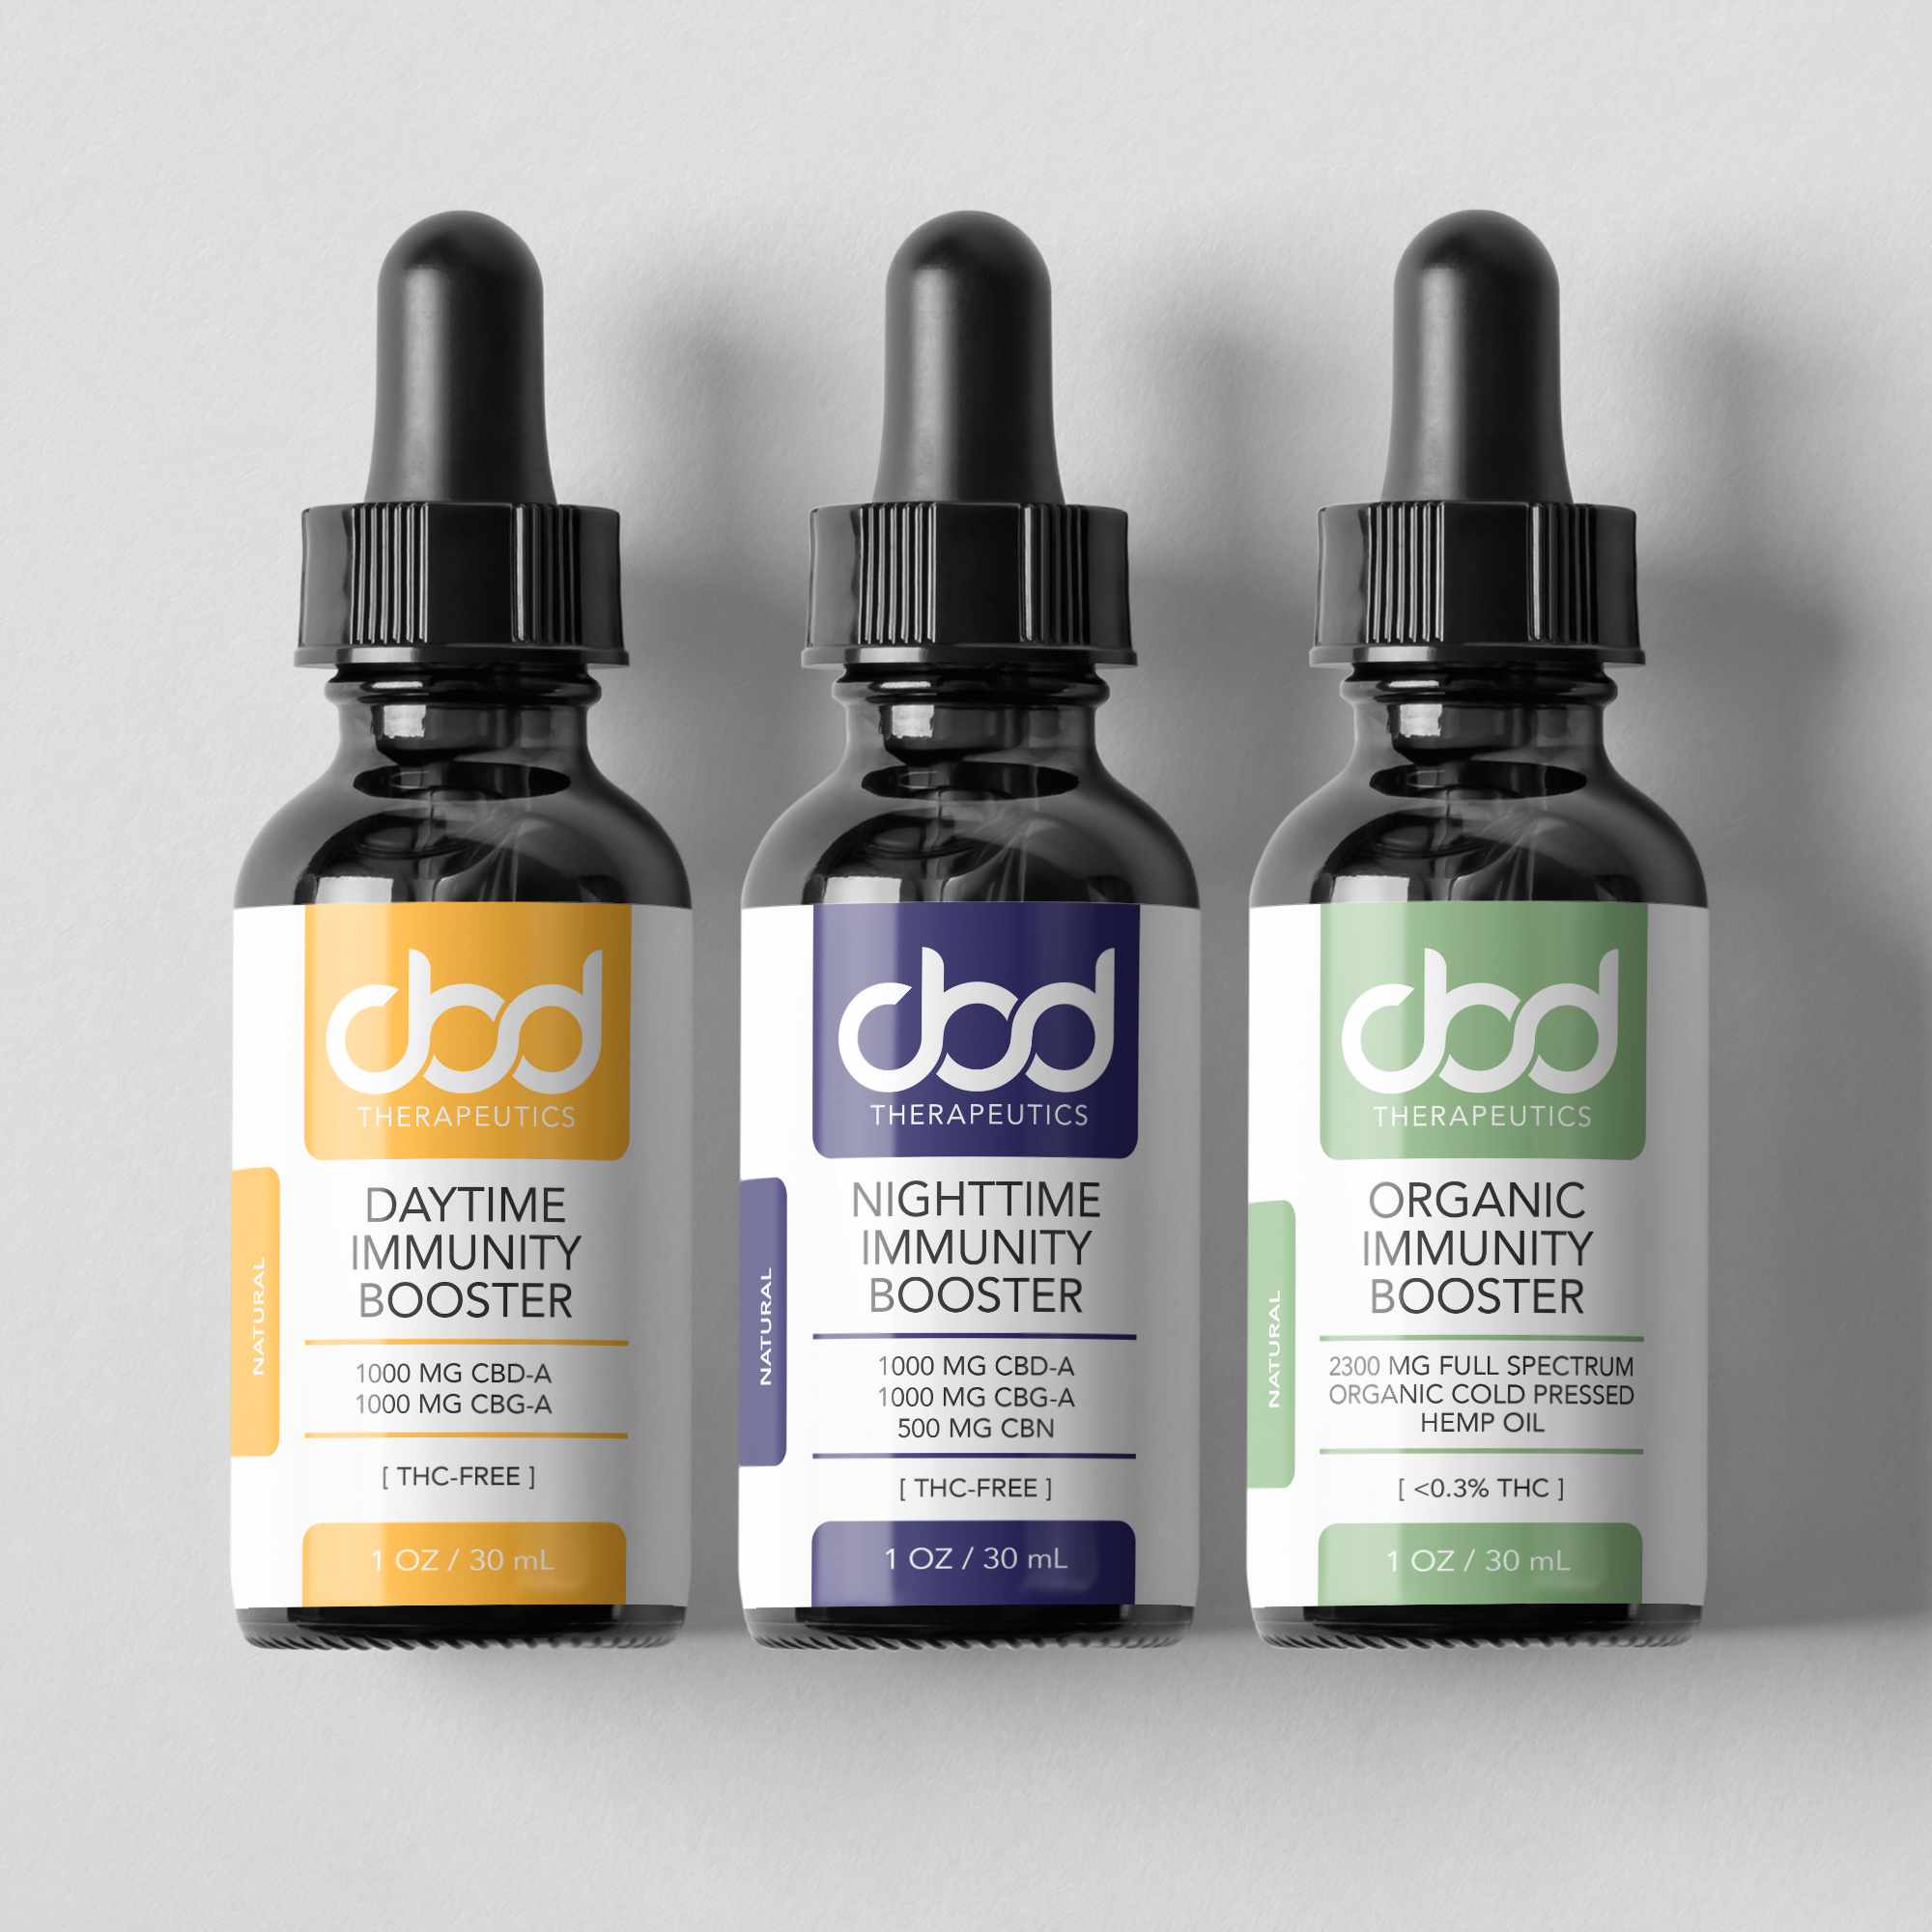 About Ordering Wholesale Retail-Ready CBD Finished Products